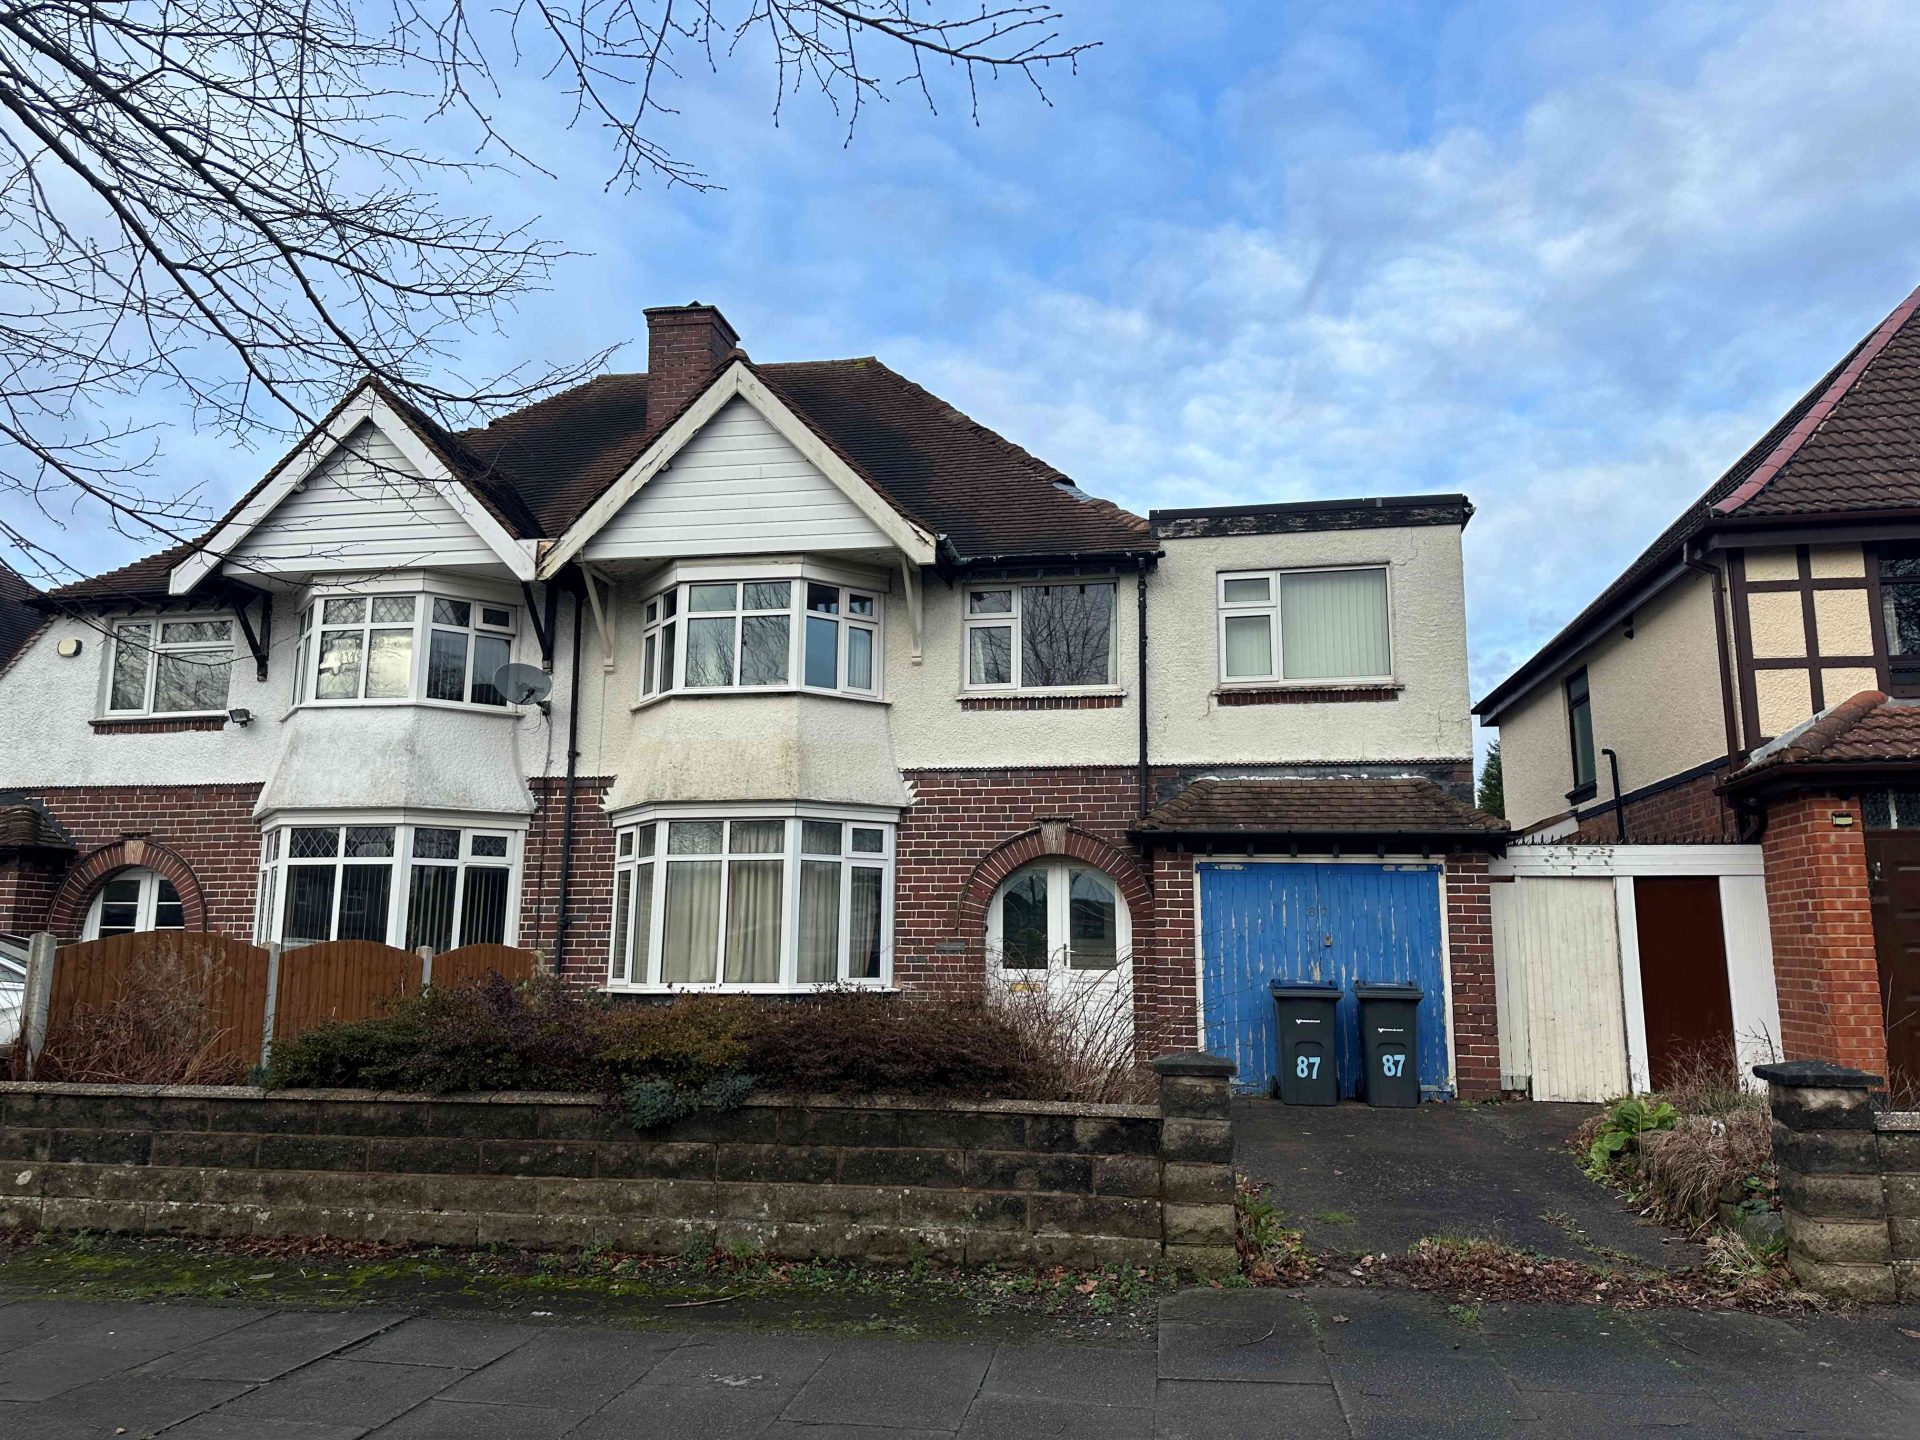 Bond Wolfe Robin Hood Lane Frontage Large home with development potential has starting price of £99k in Bond Wolfe auction